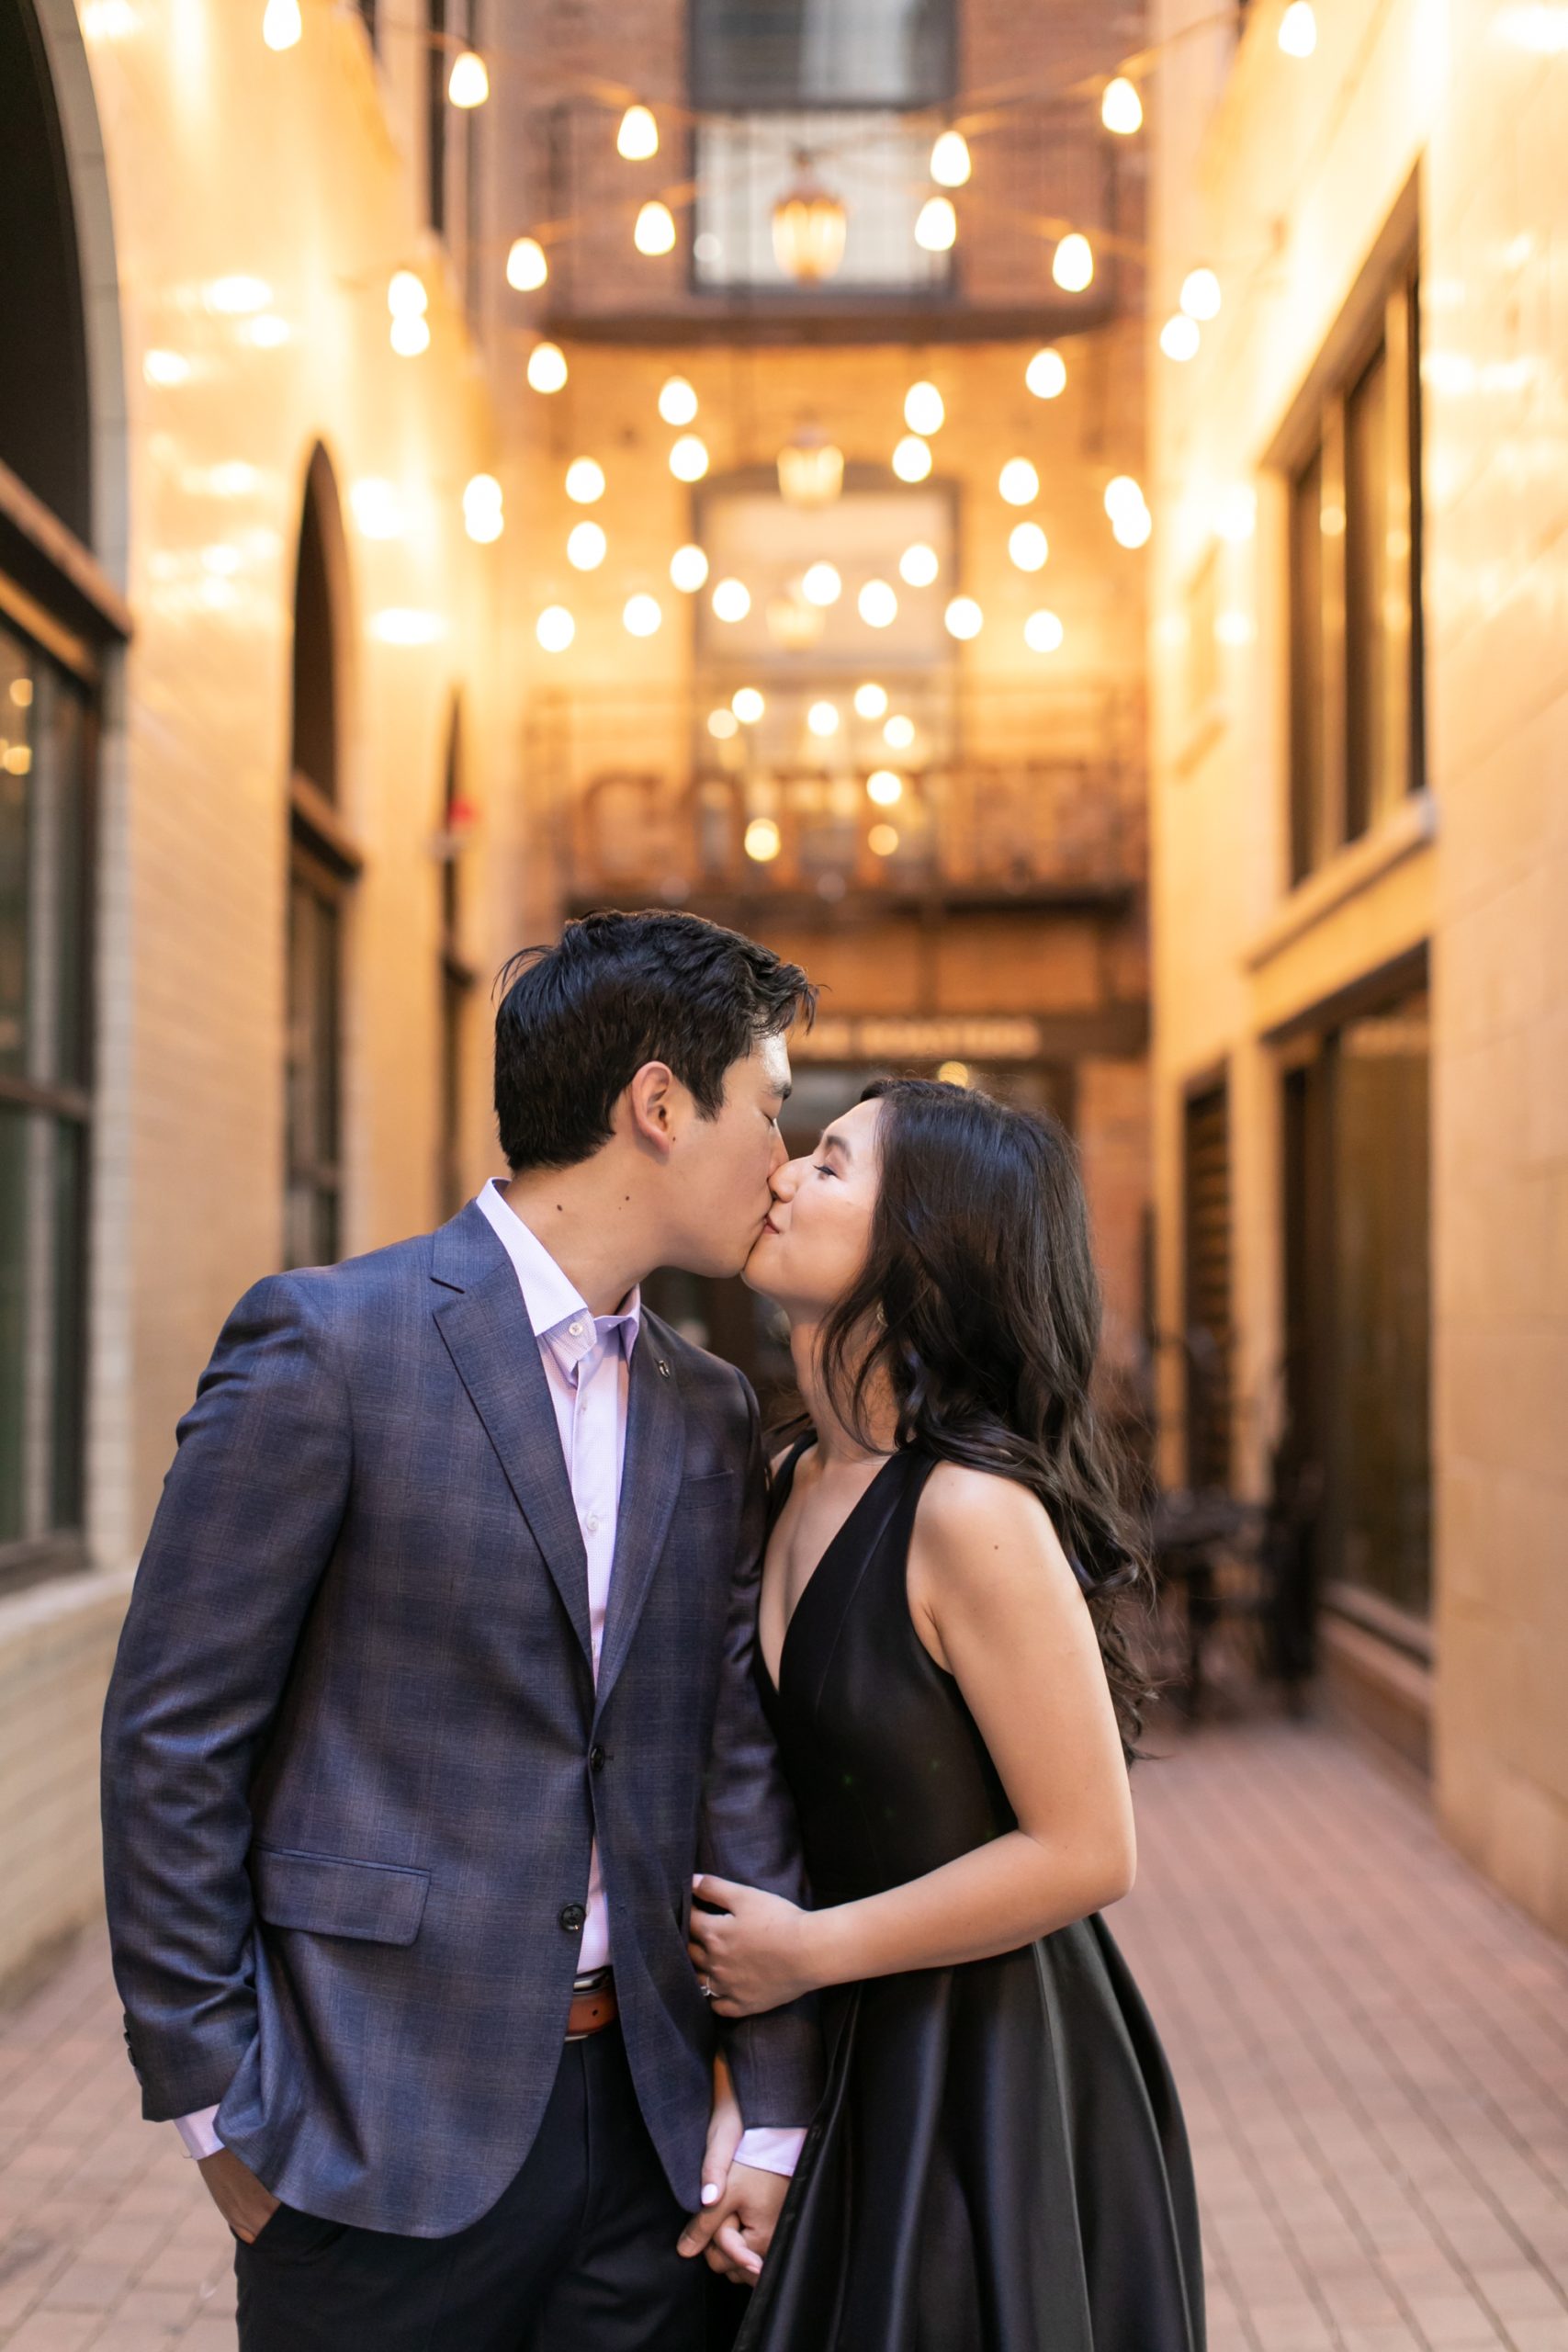 The couple kissed during the summer engagement photos in Chicago